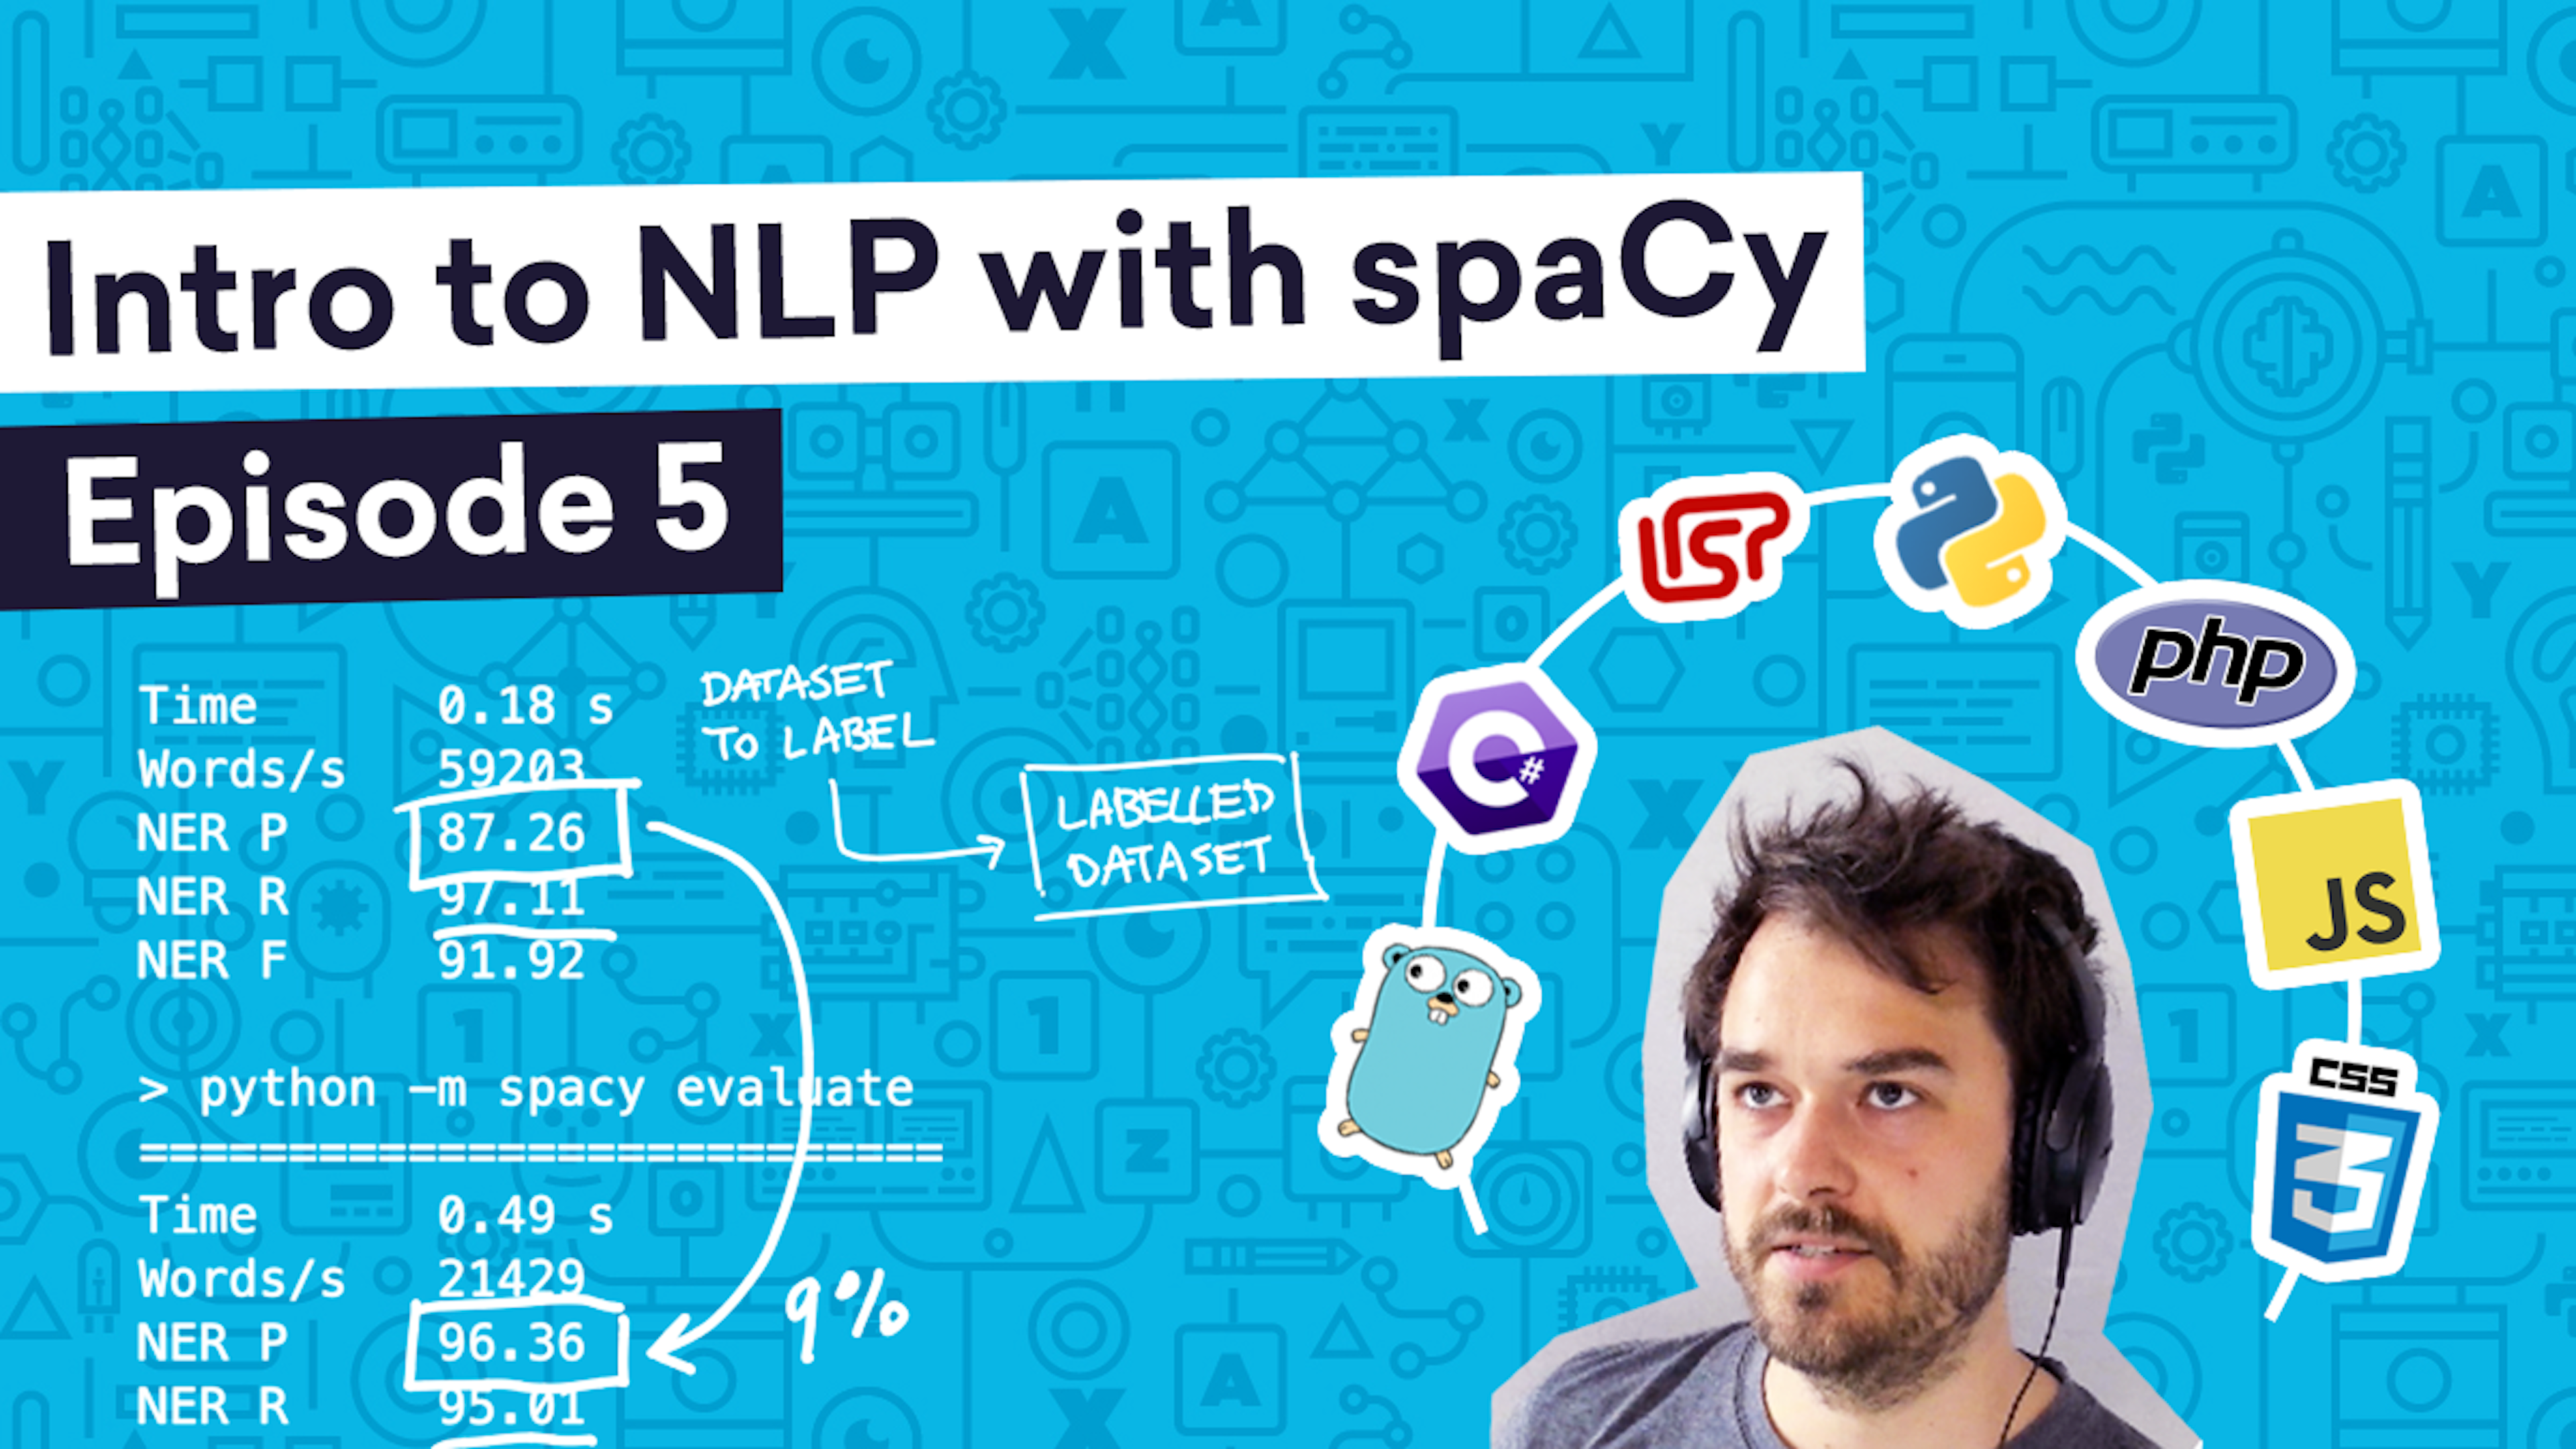 Intro to NLP with spaCy (5): Detecting programming languages